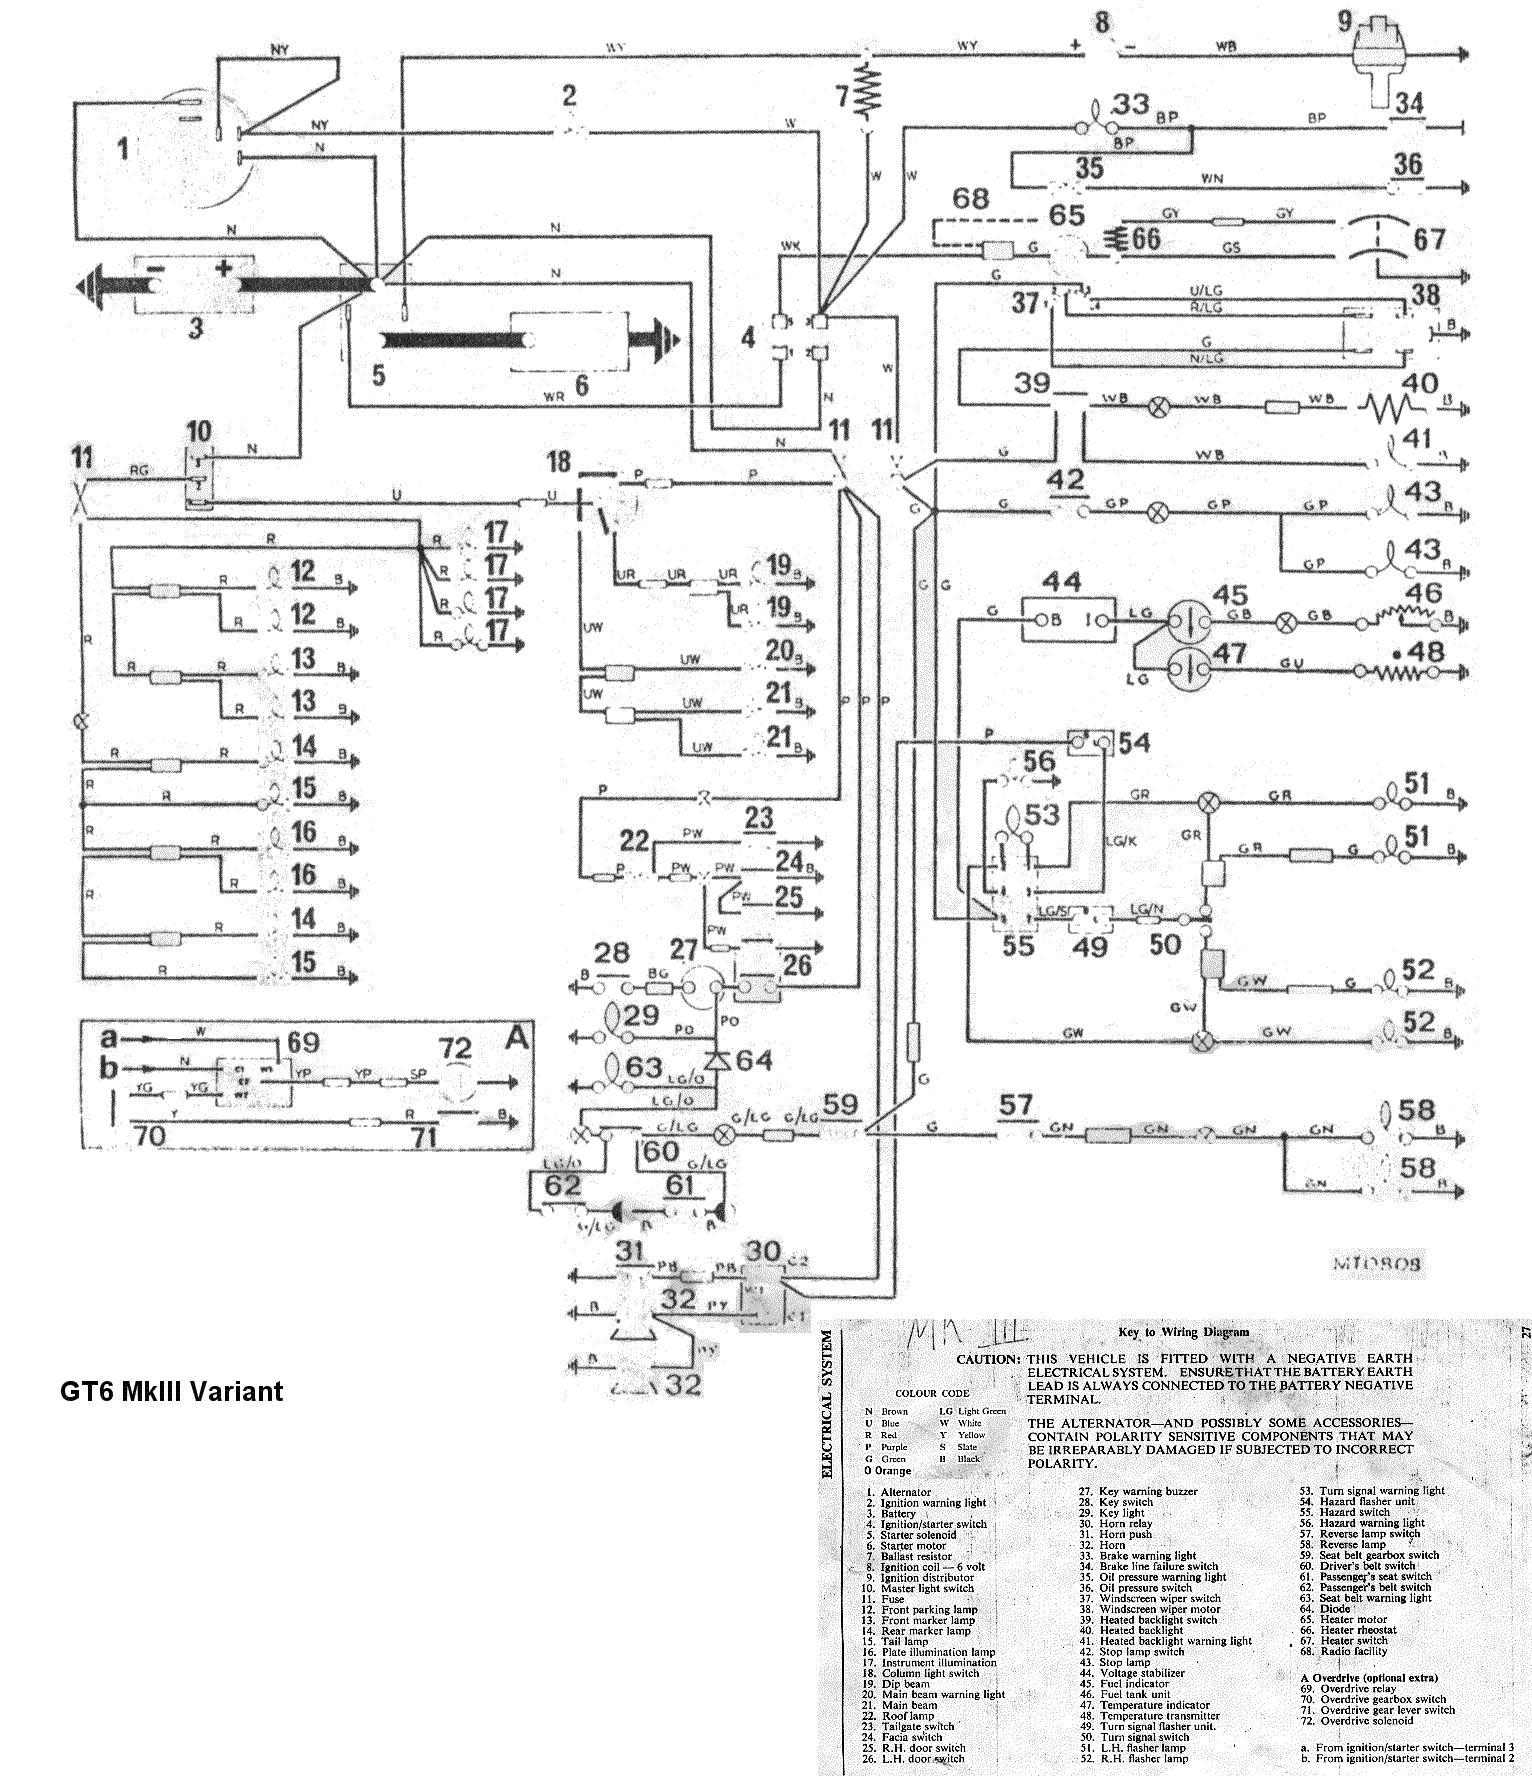 1972 Ford Truck Wiring Diagram from www.geocities.ws